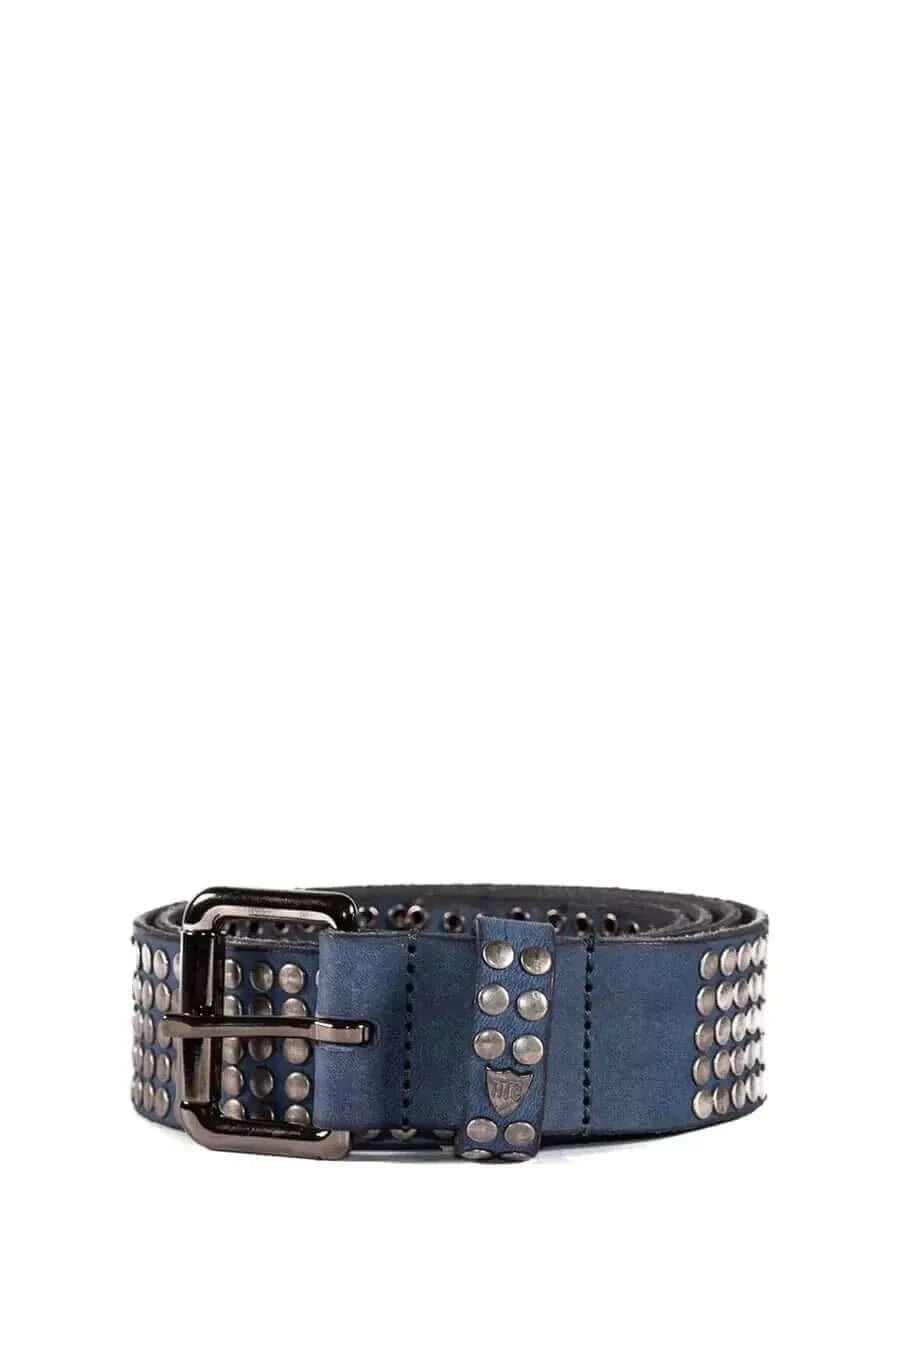 5.000 STUDS COLOR BELT Leather belt with mixed studs, brass buckle, studded zamac belt loop with HTC logo rivet. Height: 3.5 cm. Made in Italy. HTC LOS ANGELES